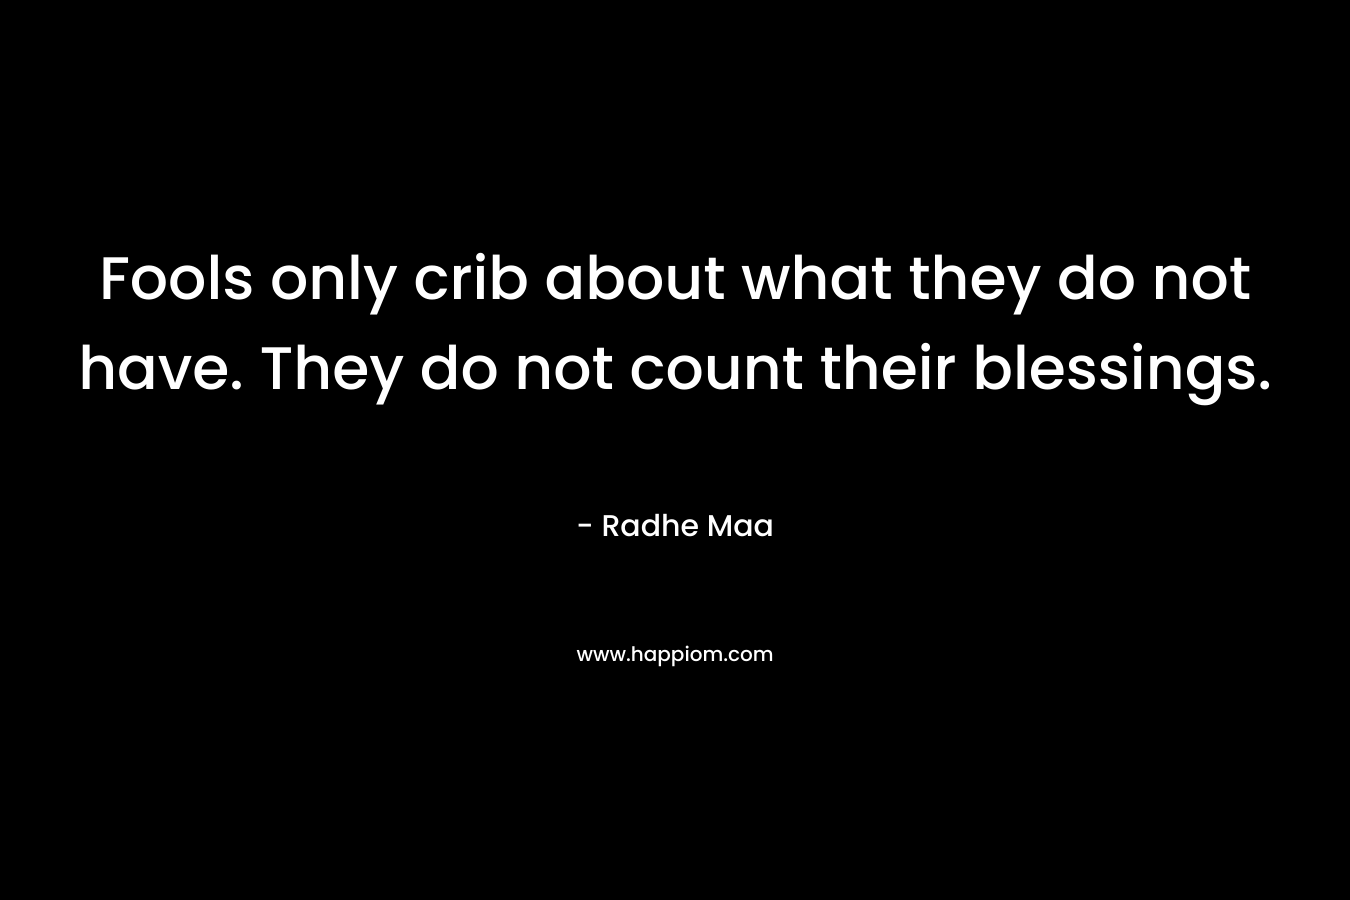 Fools only crib about what they do not have. They do not count their blessings.